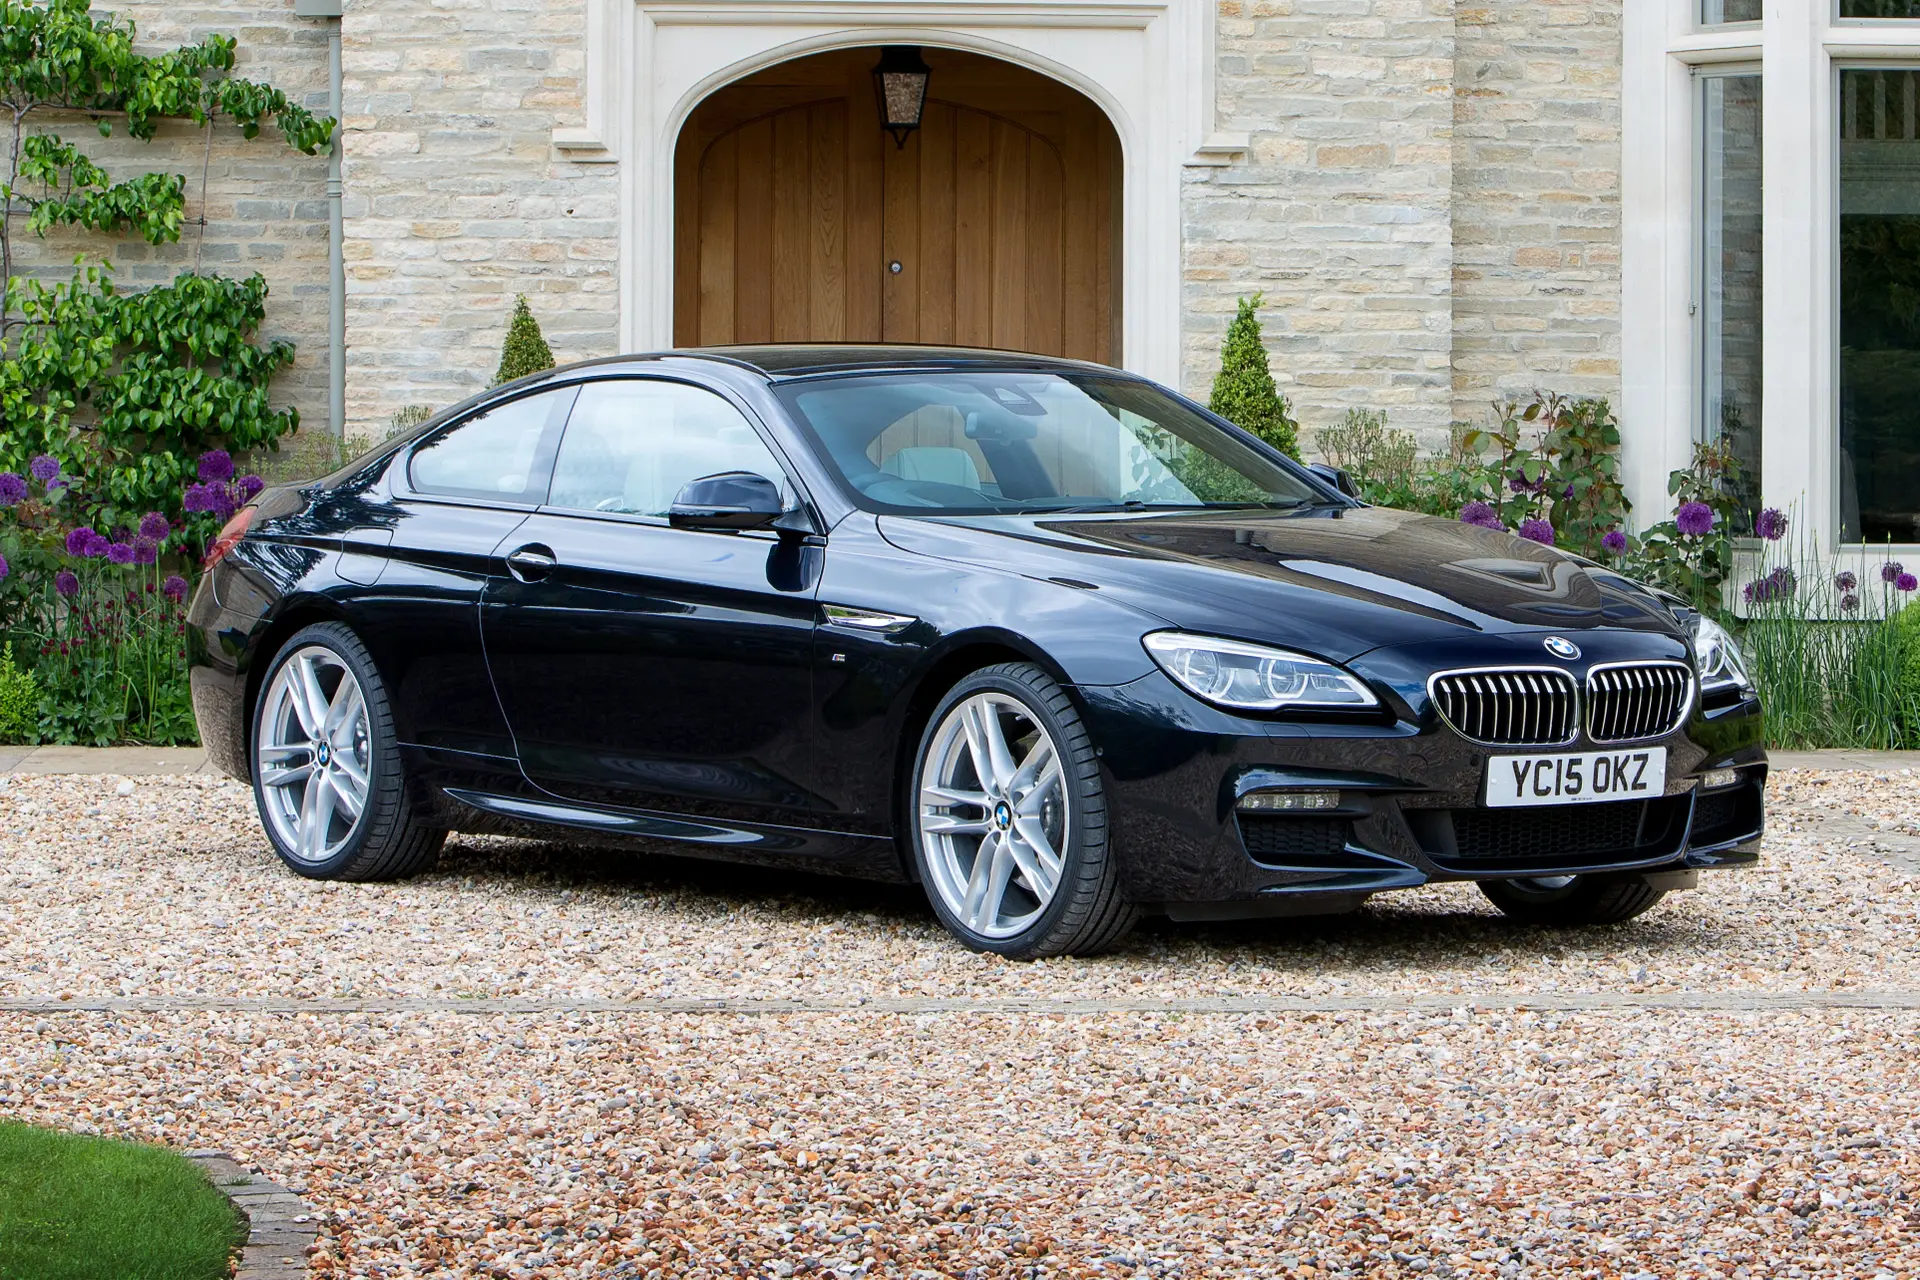 BMW 6 Series (2011-2018) Review: exterior front three quarter photo of the BMW 6 Series